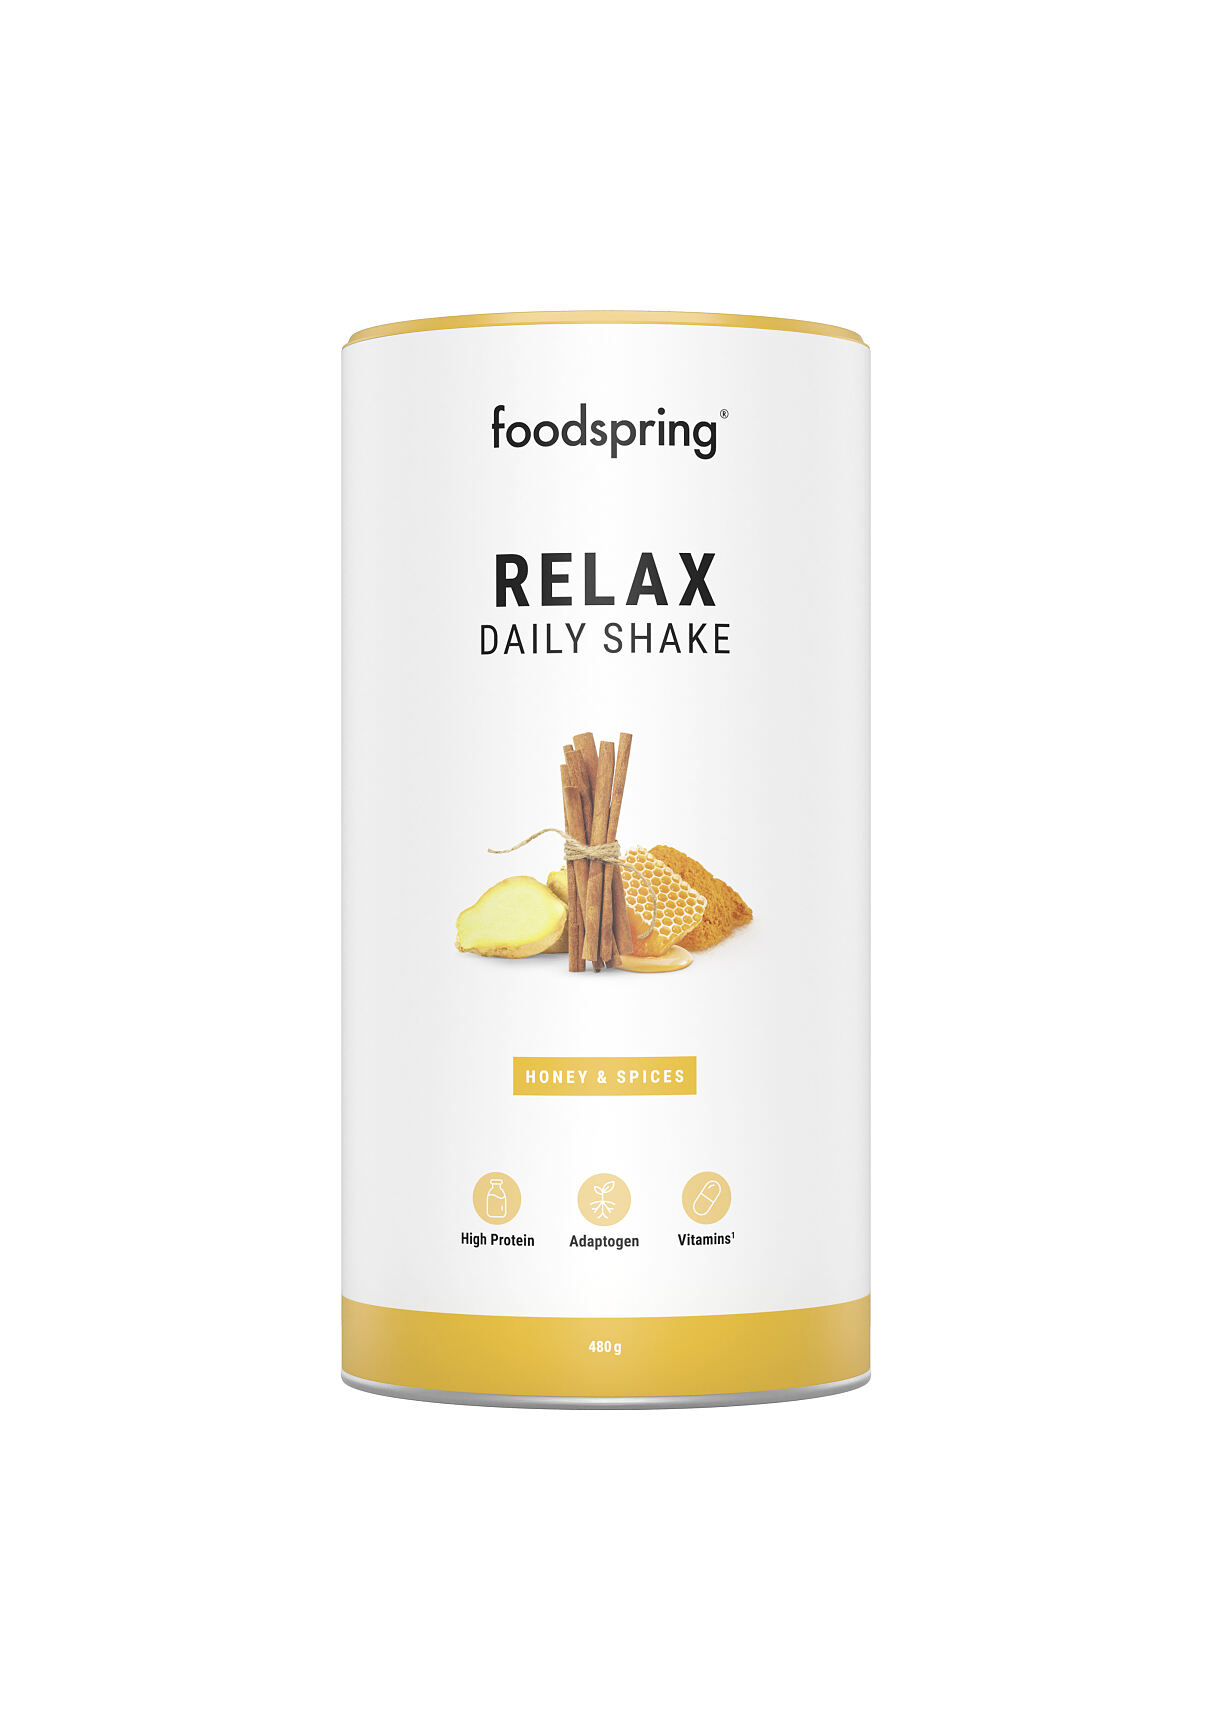 foodspring_Daily Shake Relax_Honey & Spices_je 32,99 Euro